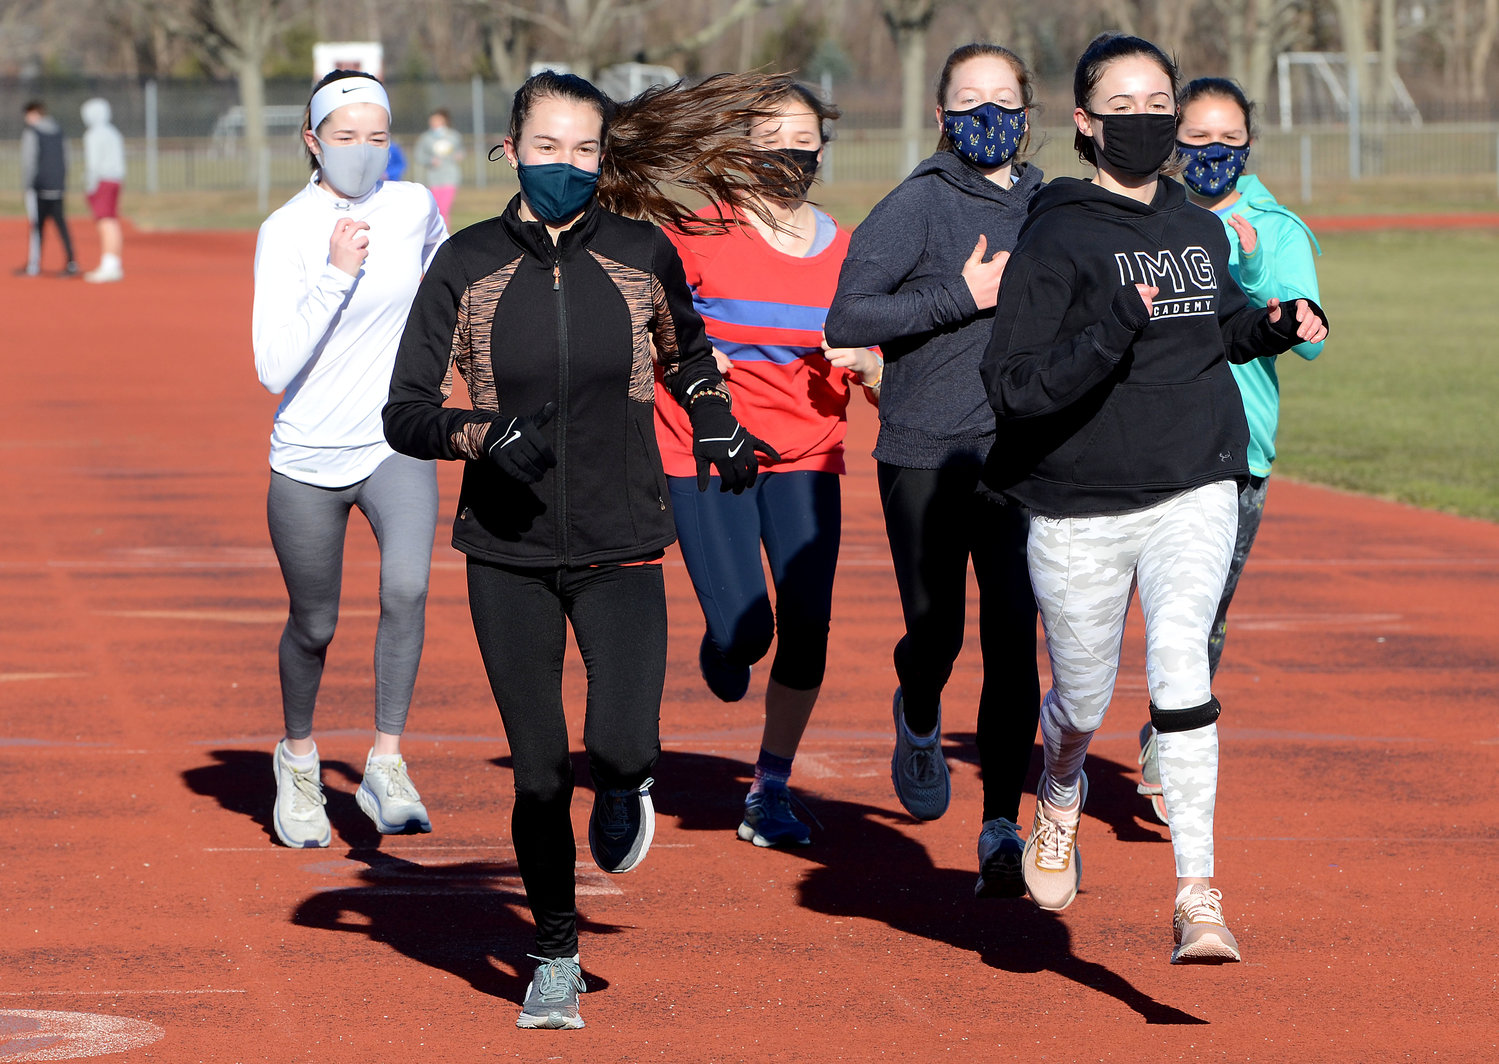 Members of the Barrington High School girls indoor track team run through a practice session on the outdoor track on Monday morning, Jan. 18. Pictured are (from left to right) Kyle Keough, Lindsay Turgeon, Jane Bryant, Virginia Sanderson, Maeve Murphy and Tosca Barako taking a warm-up lap before the start of the work-out.